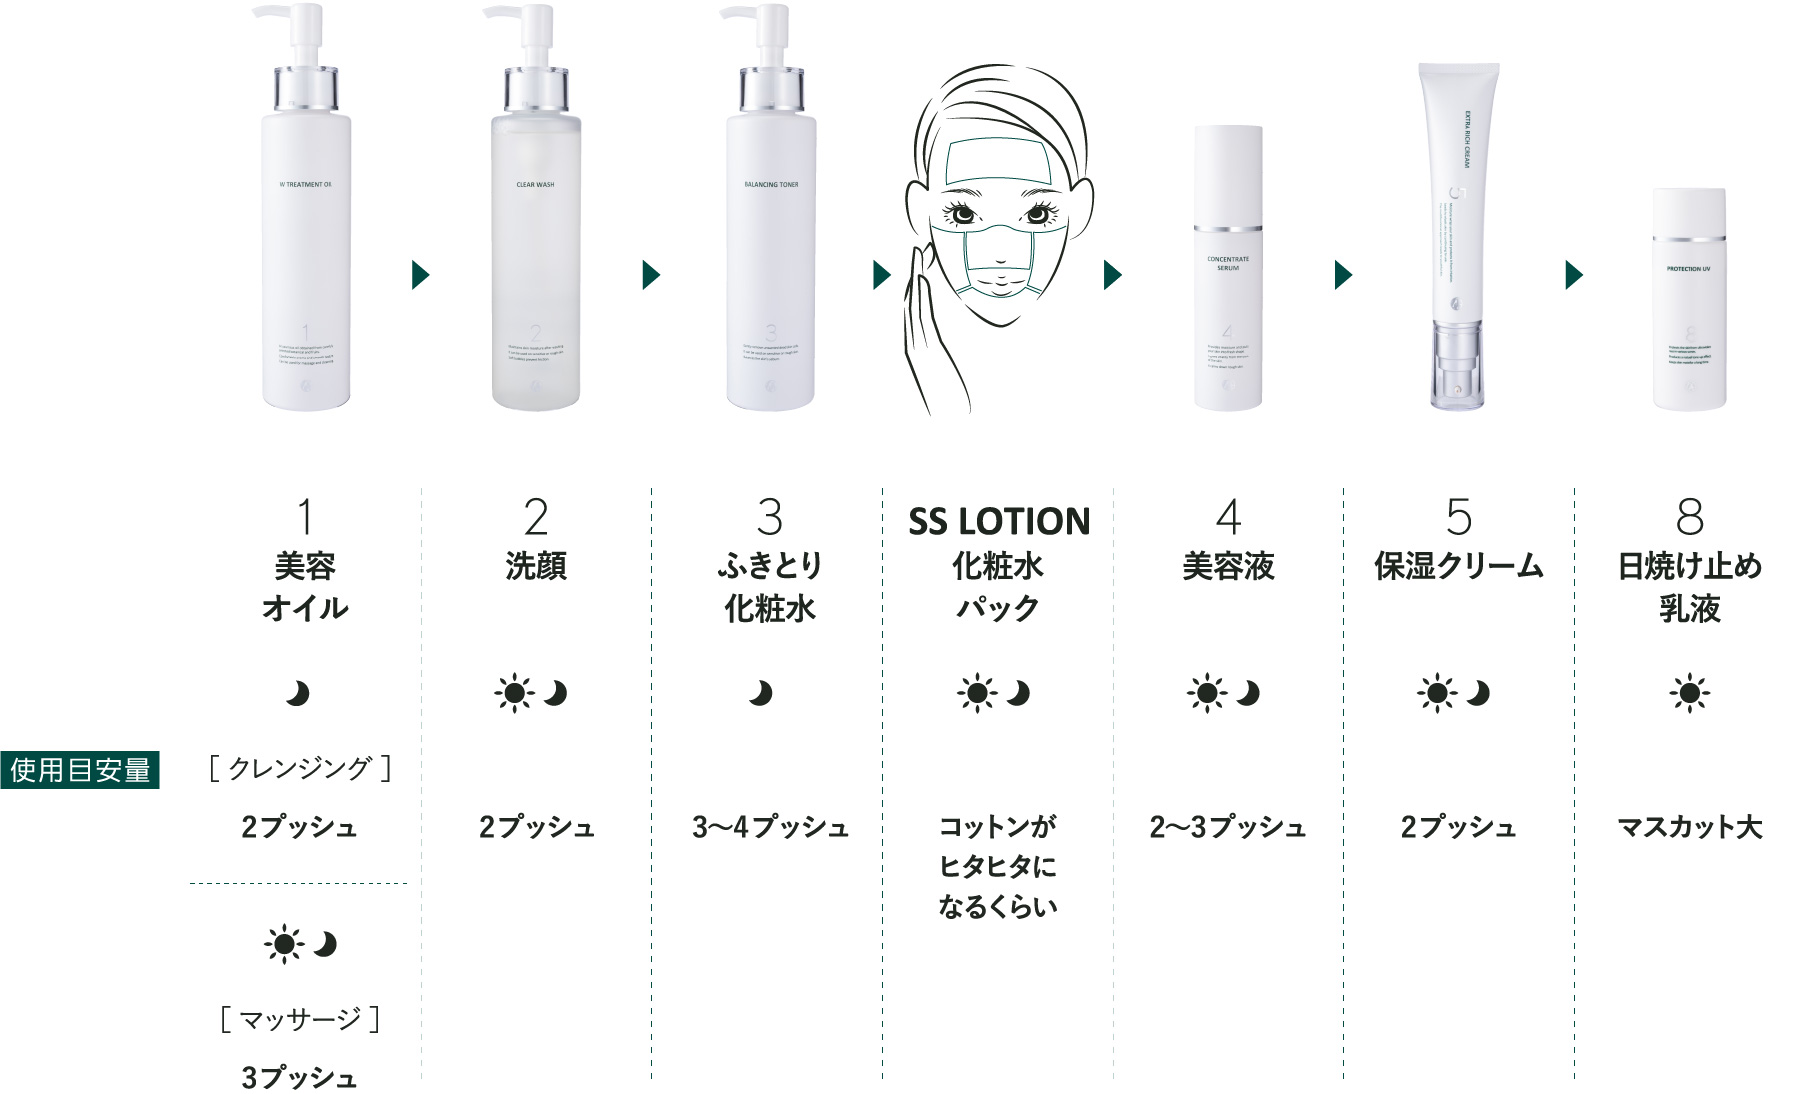 SKIN SOOTHING LOTION｜DOC Skincare｜肌のチカラを高め、肌を育む 